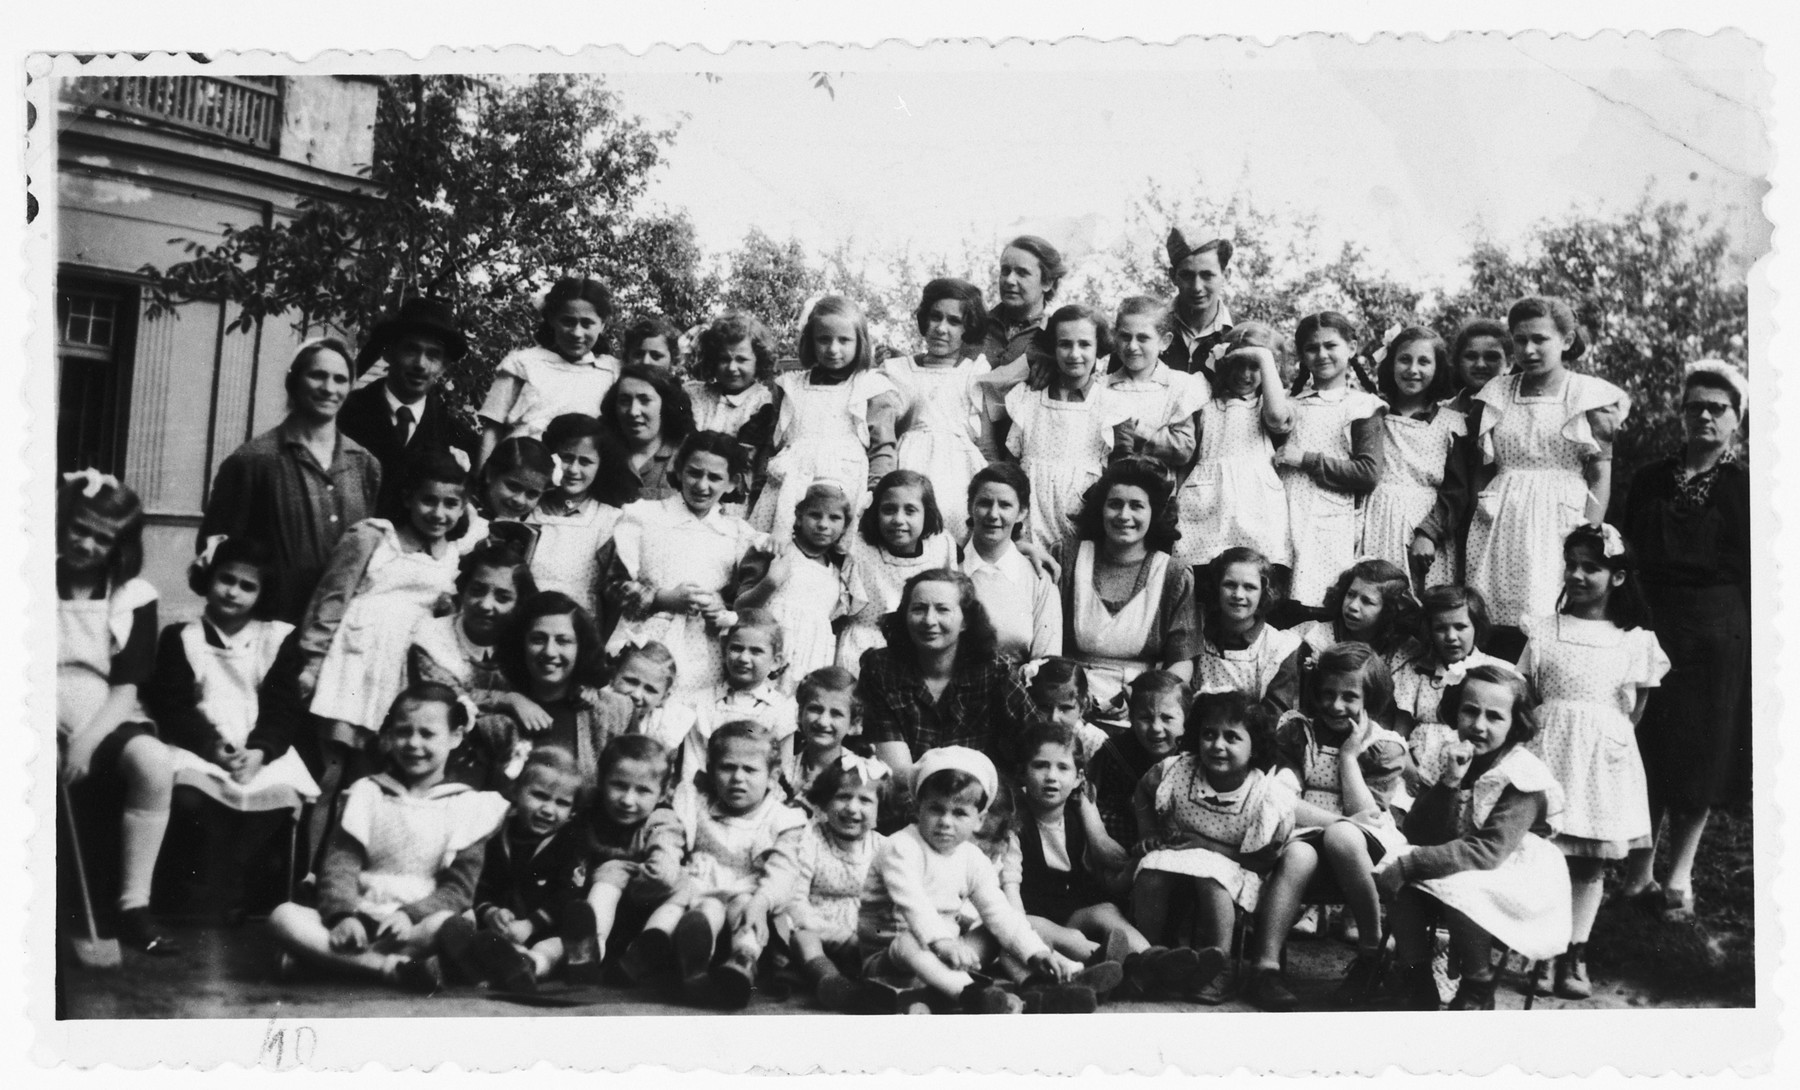 Zsofi Brunn (back row, center) poses with the orphans under her care in a JDC sponsored orphanage outside of Budapest.

Zsofi Brunn directed this orphanage from 1946 to 1948.  The children were retrieved from hiding from the JDC, and Zsofi worked with the Zionist underground to bring the children to Israel.  In 1948 an informant told the governmnet about her activities, and she had to flee to Germany.